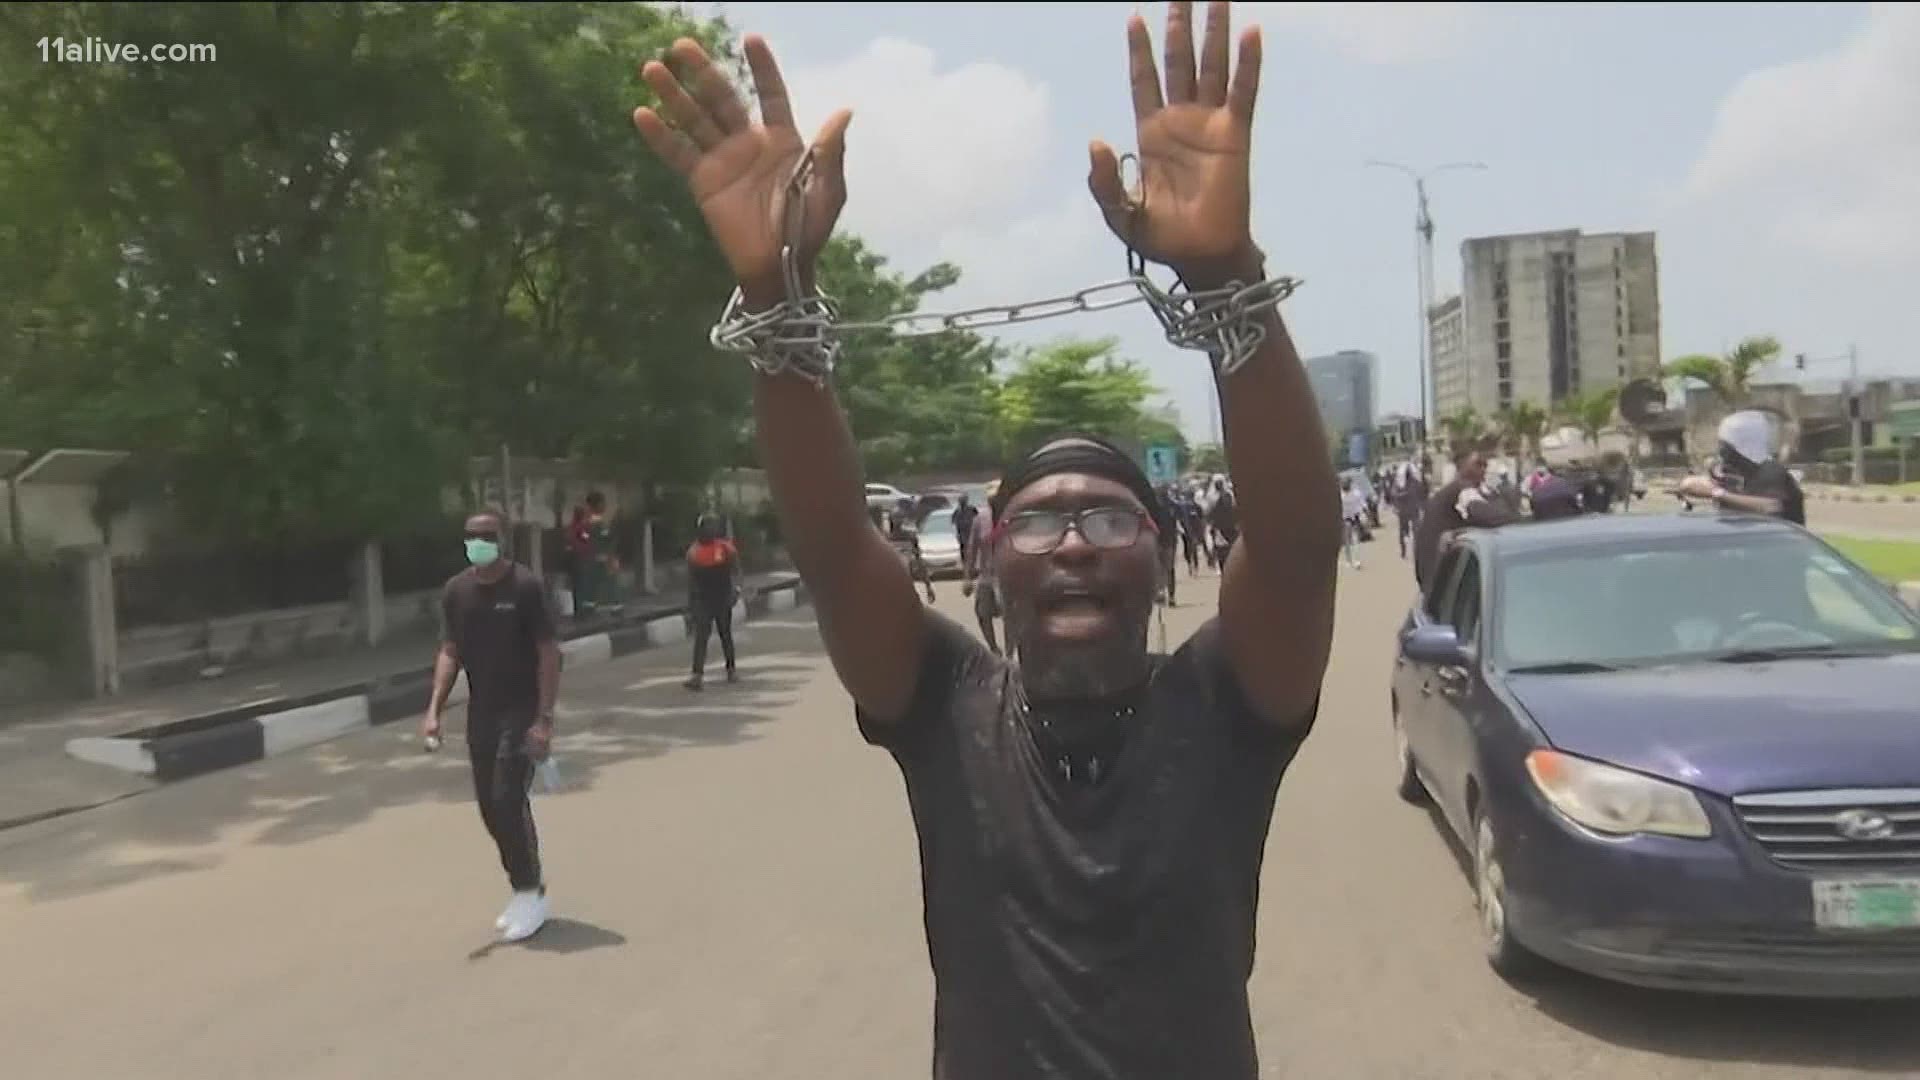 Witnesses in Lagos said several people were hurt or killed Tuesday when soldiers barricaded a toll gate and opened fire during protests calling for the end of SARS.